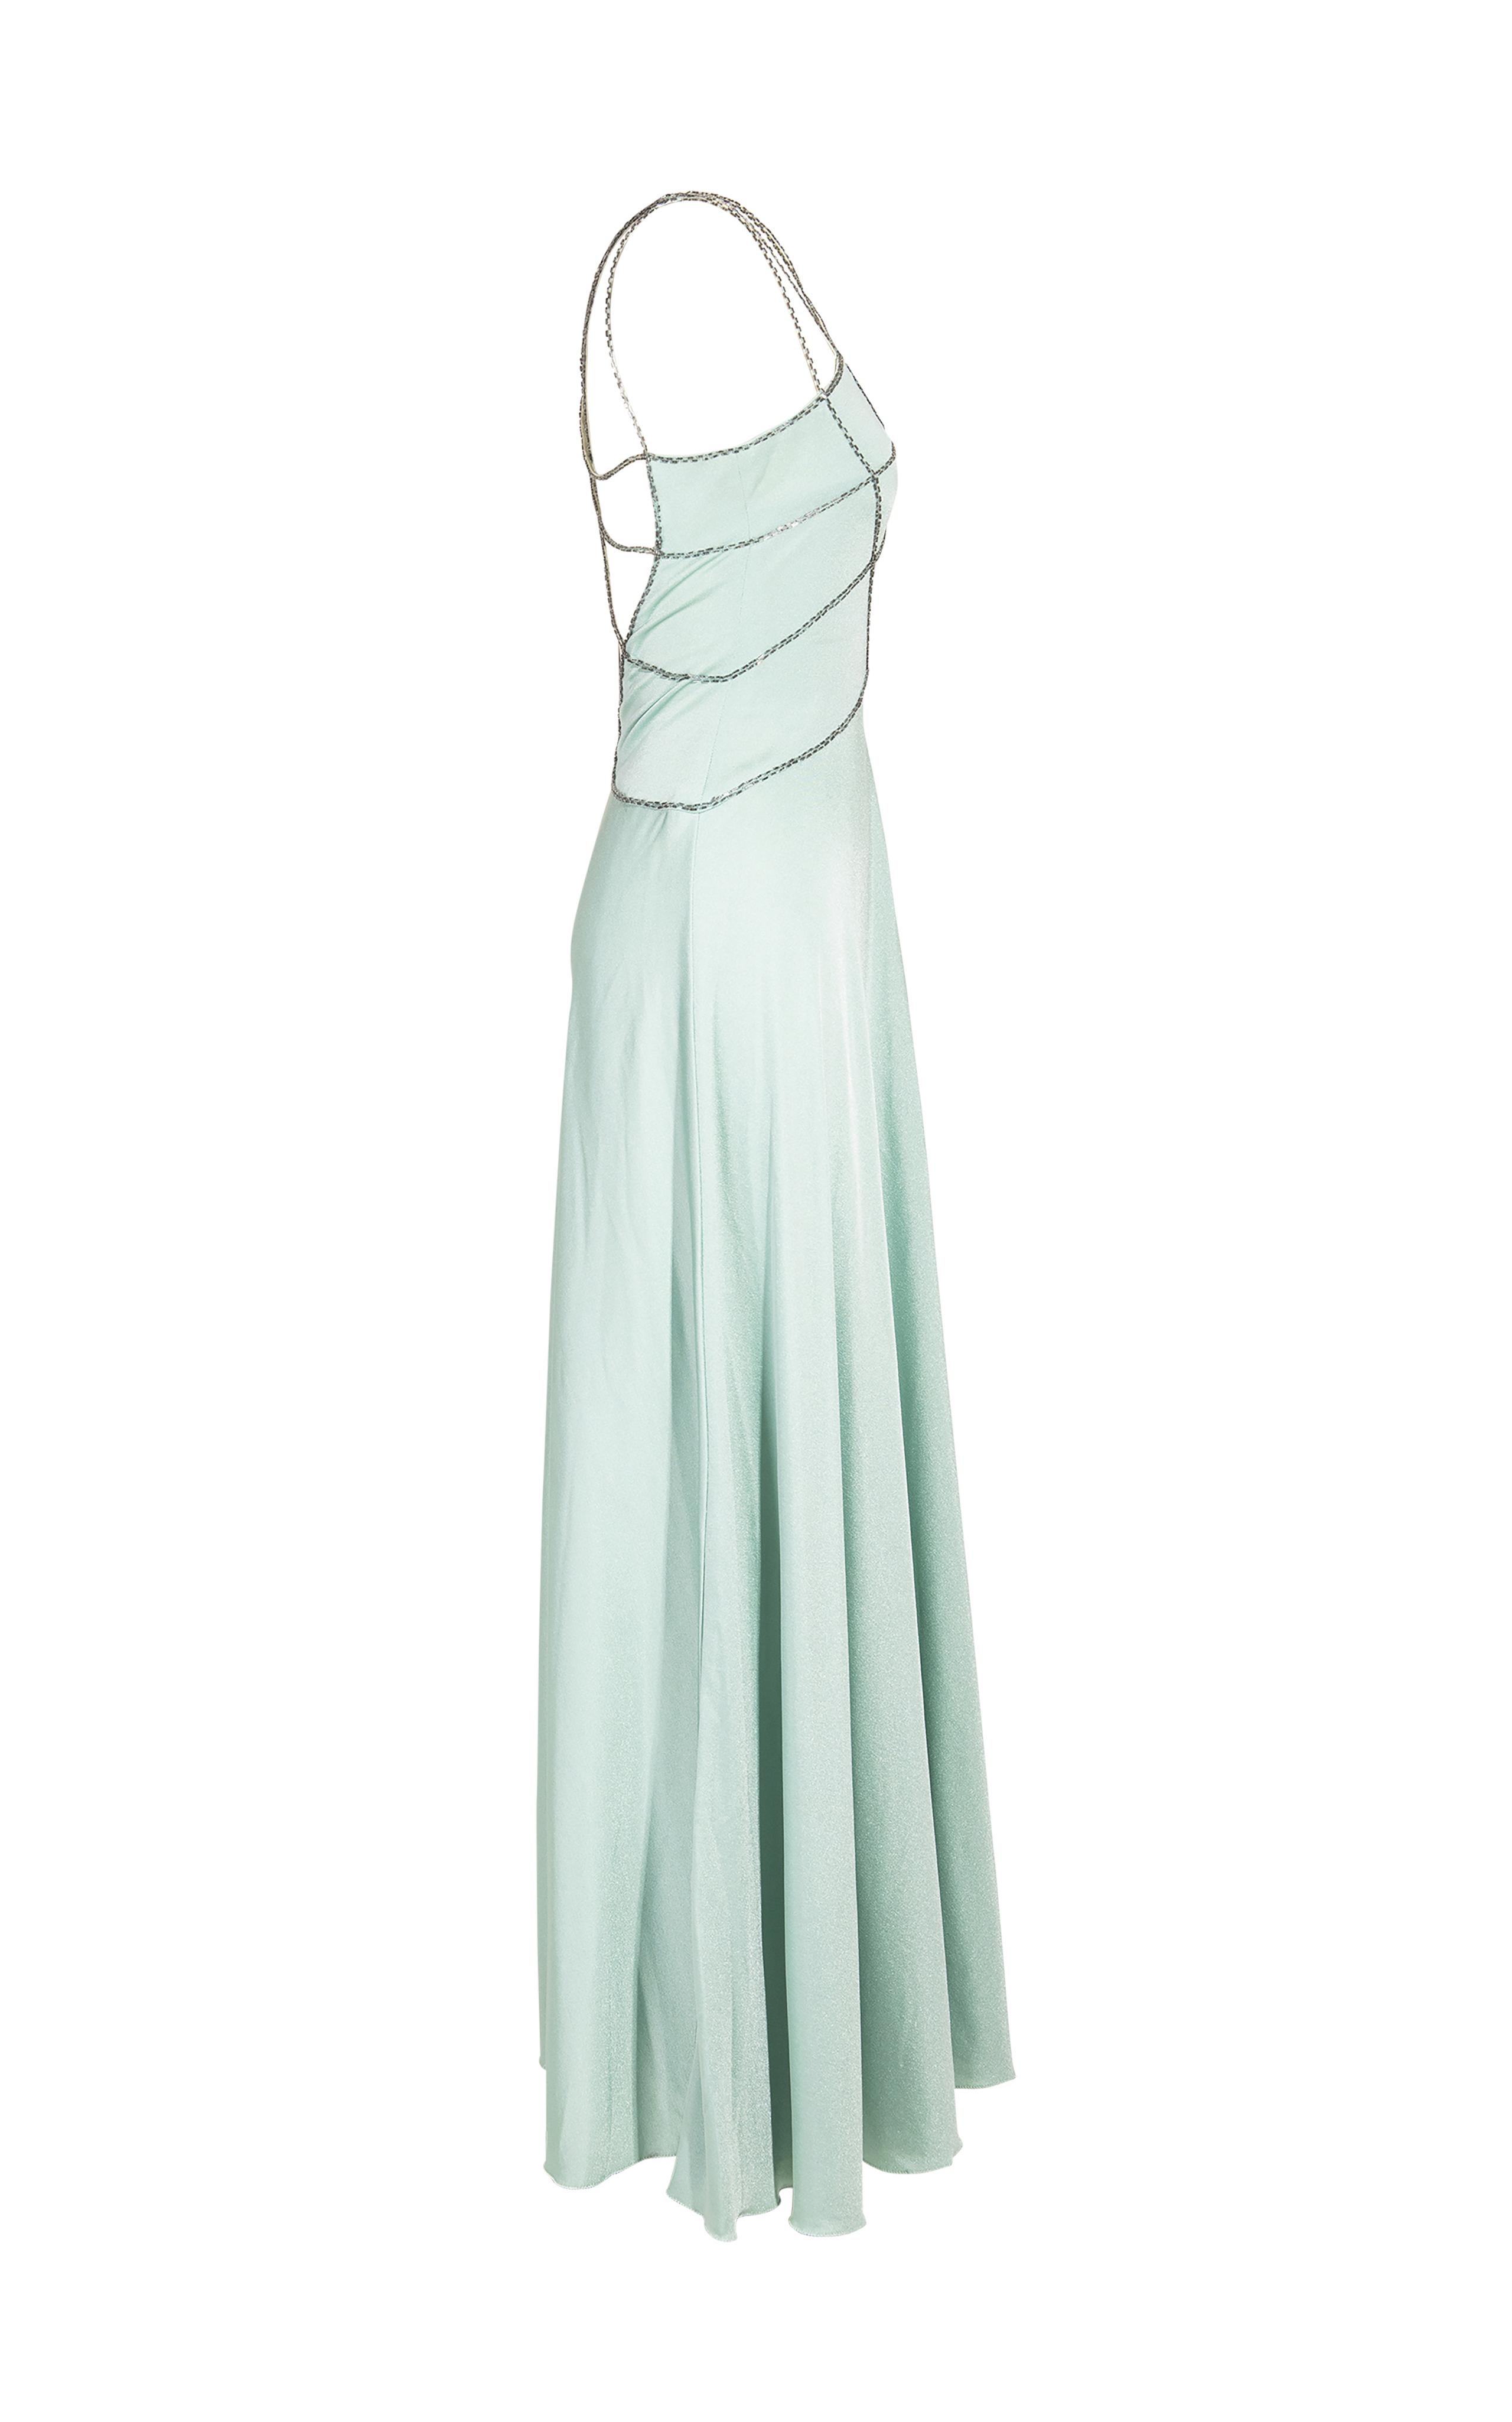 1970's Loris Azzaro mint gown with beaded cage upper. Beaded cage detail wraps across chest and back. Full length sleeveless gown with full skirt and moderate stretch throughout.